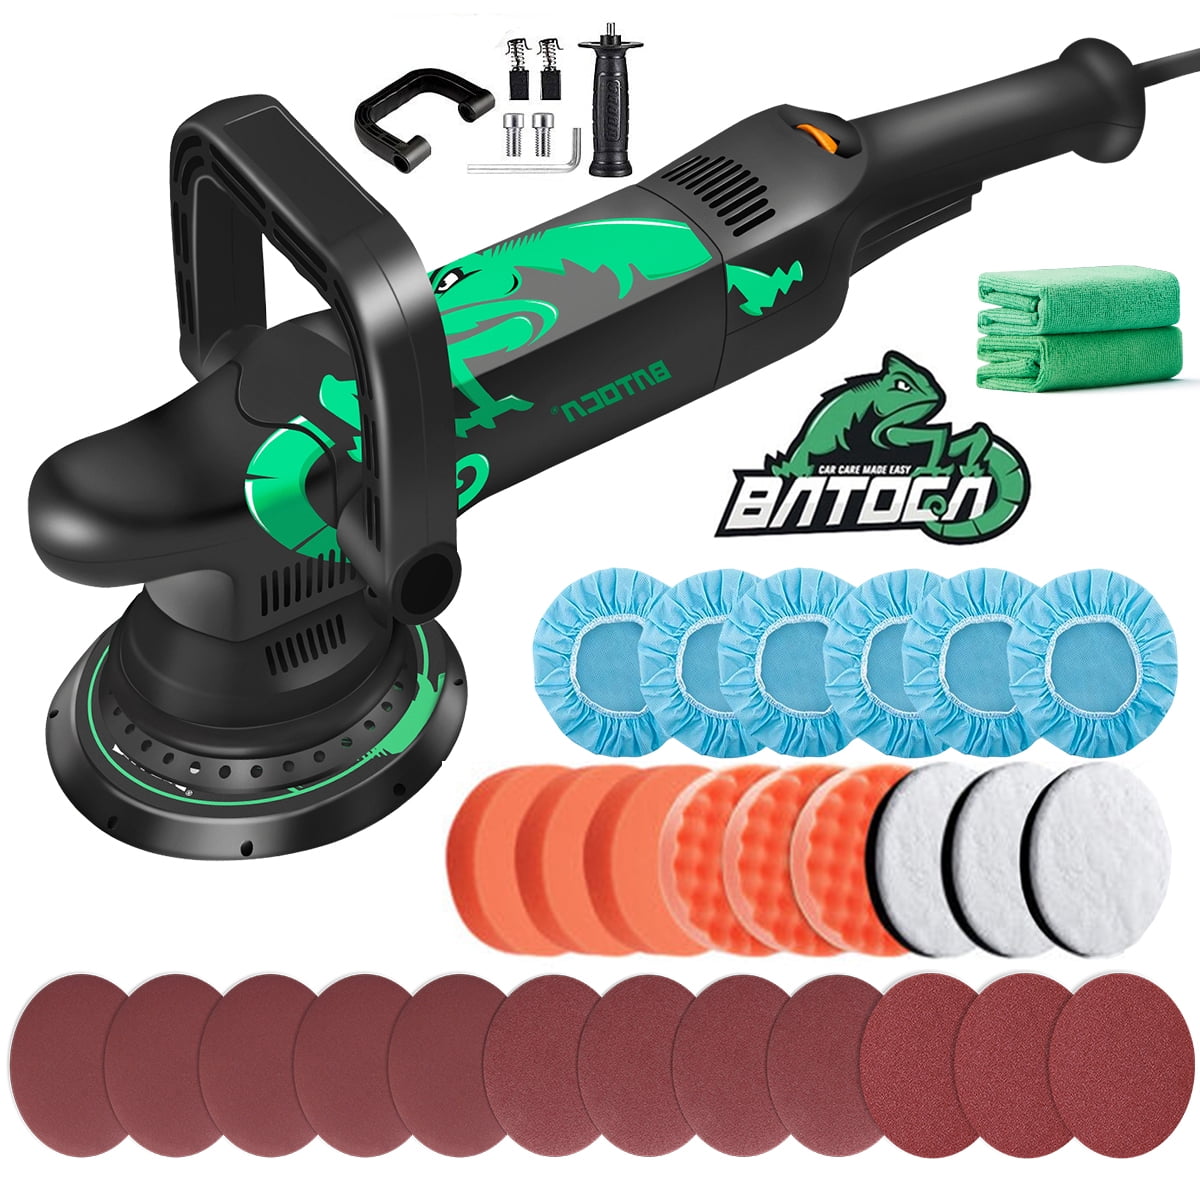 VANNECT Buffer Polisher, 1200W 7-inch Dual Action Polisher with 6